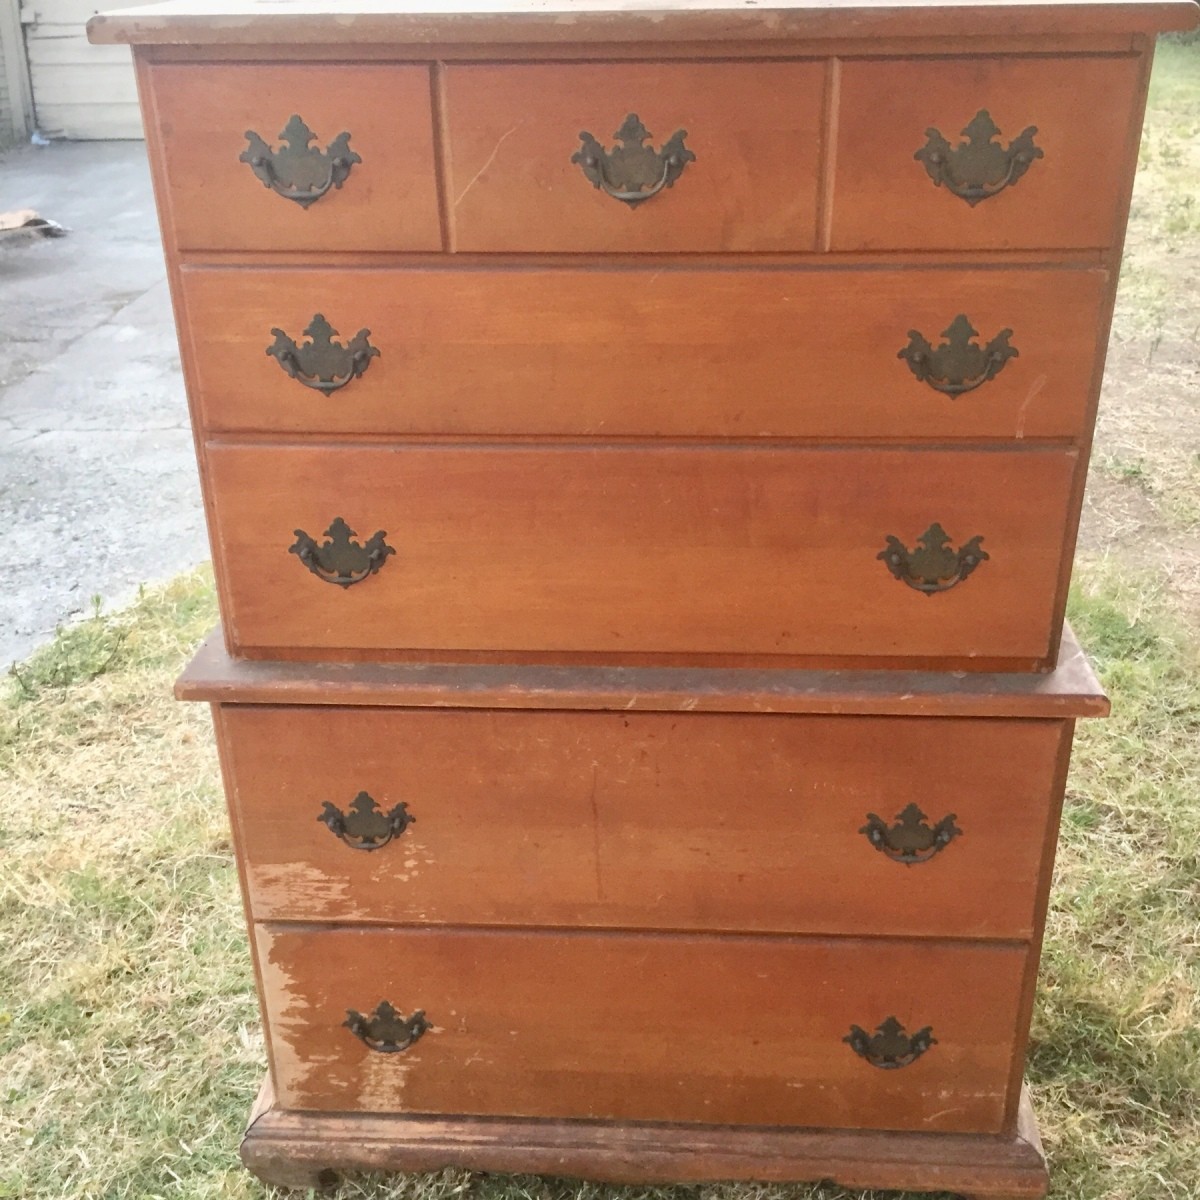 Identifying A Vintage Chest Of Drawers, How To Tell How Old A Dresser Is